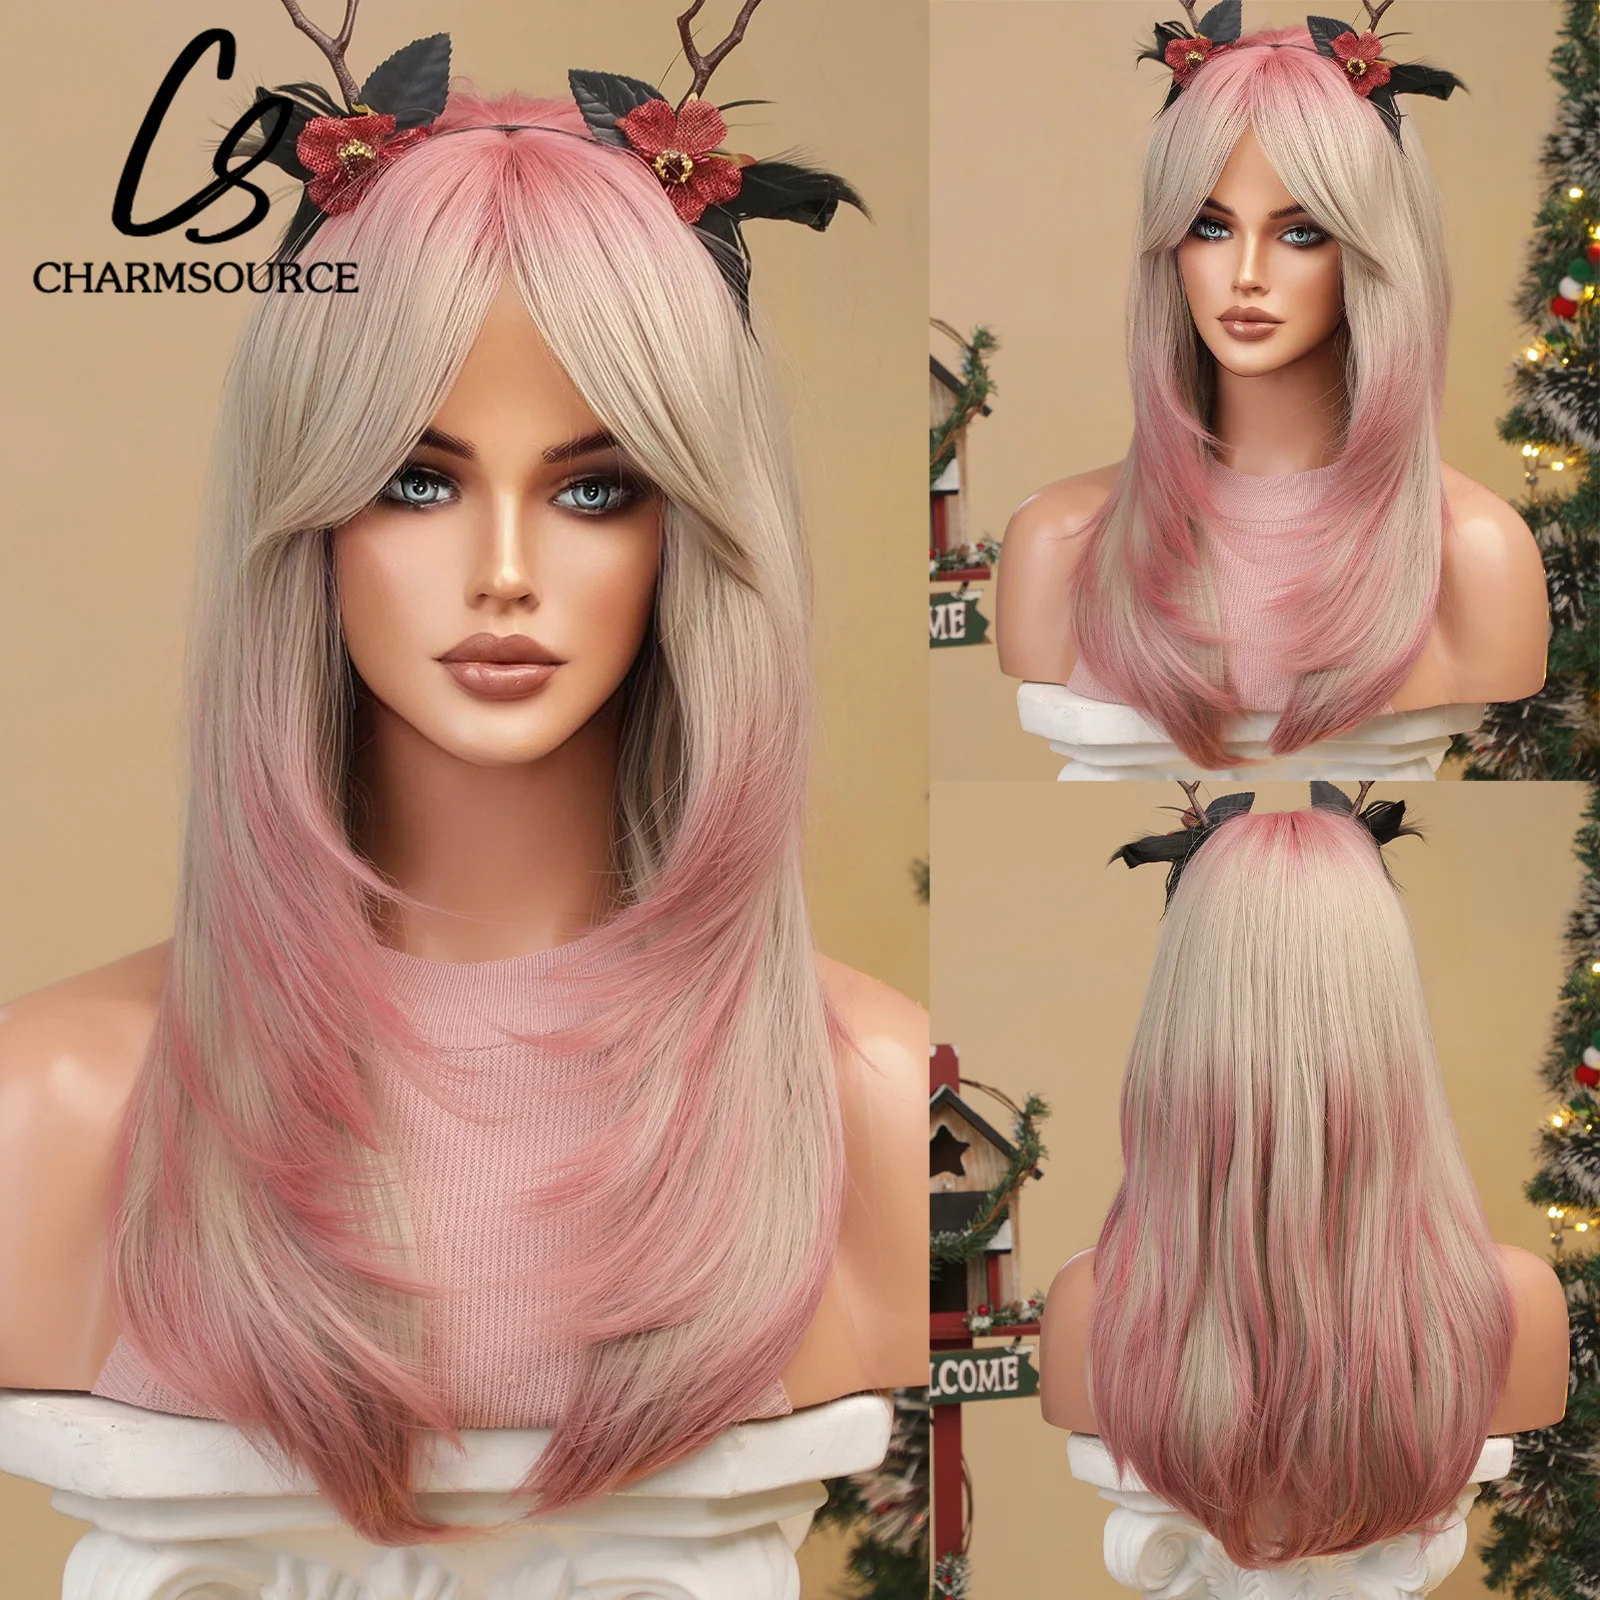 Natural Wavy Layered Synthetic Wigs Mix Beige With Pink Hair with Side Bangs for Women Daily Party Cosplay Heat Resistant Fiber